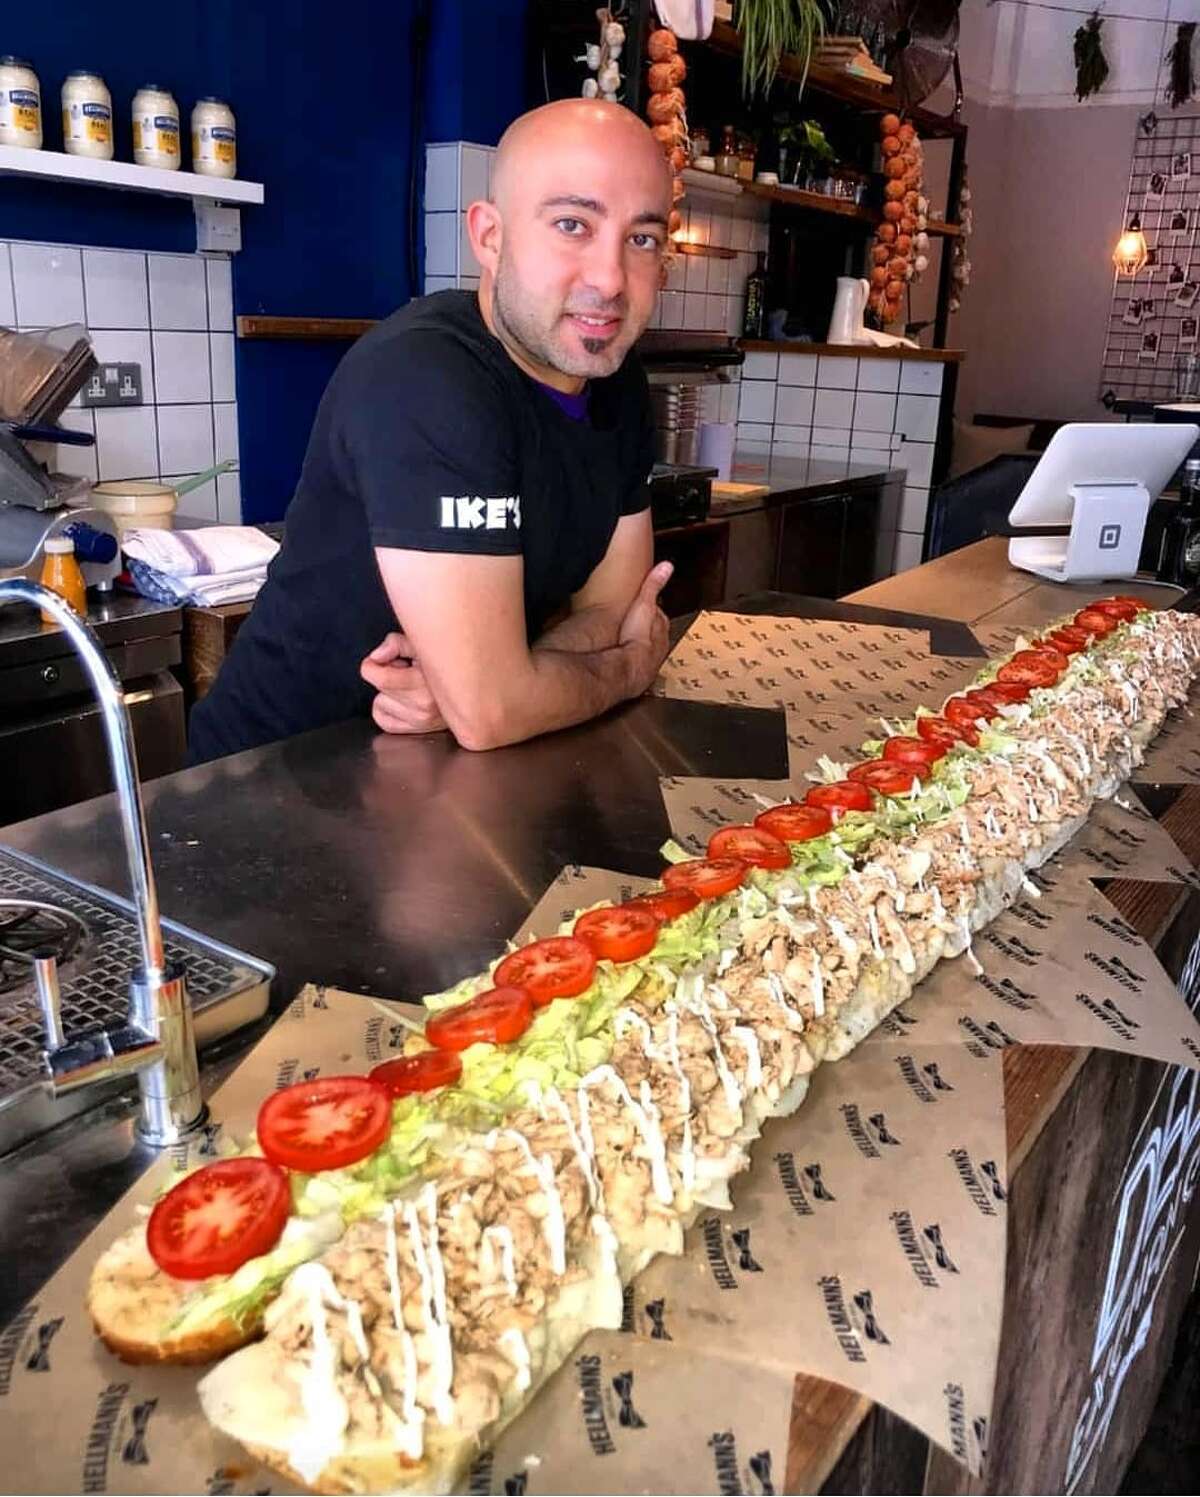 Ike Shehadeh, who created the first Ike's Place sandwich shop in San Francisco in 2007, has expanded and now has 50 stores in three states. But Shehadeh says he's done looking for another place in SF since the lease expired on his flagship store in 2016.